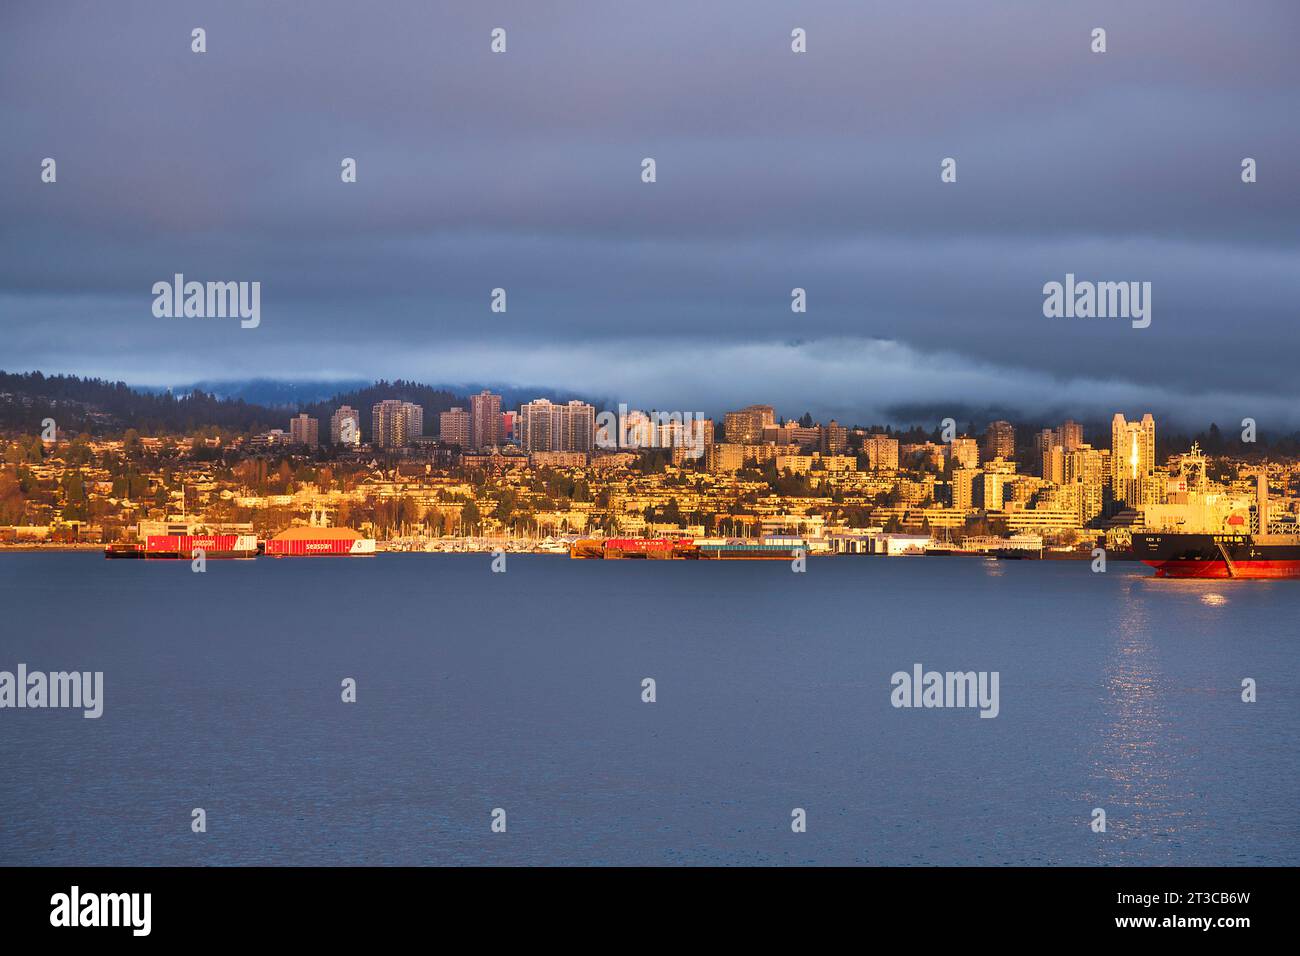 Sunlit seaside cityscape with ominous skies, North Vancouver, British Columbia, Canada Stock Photo